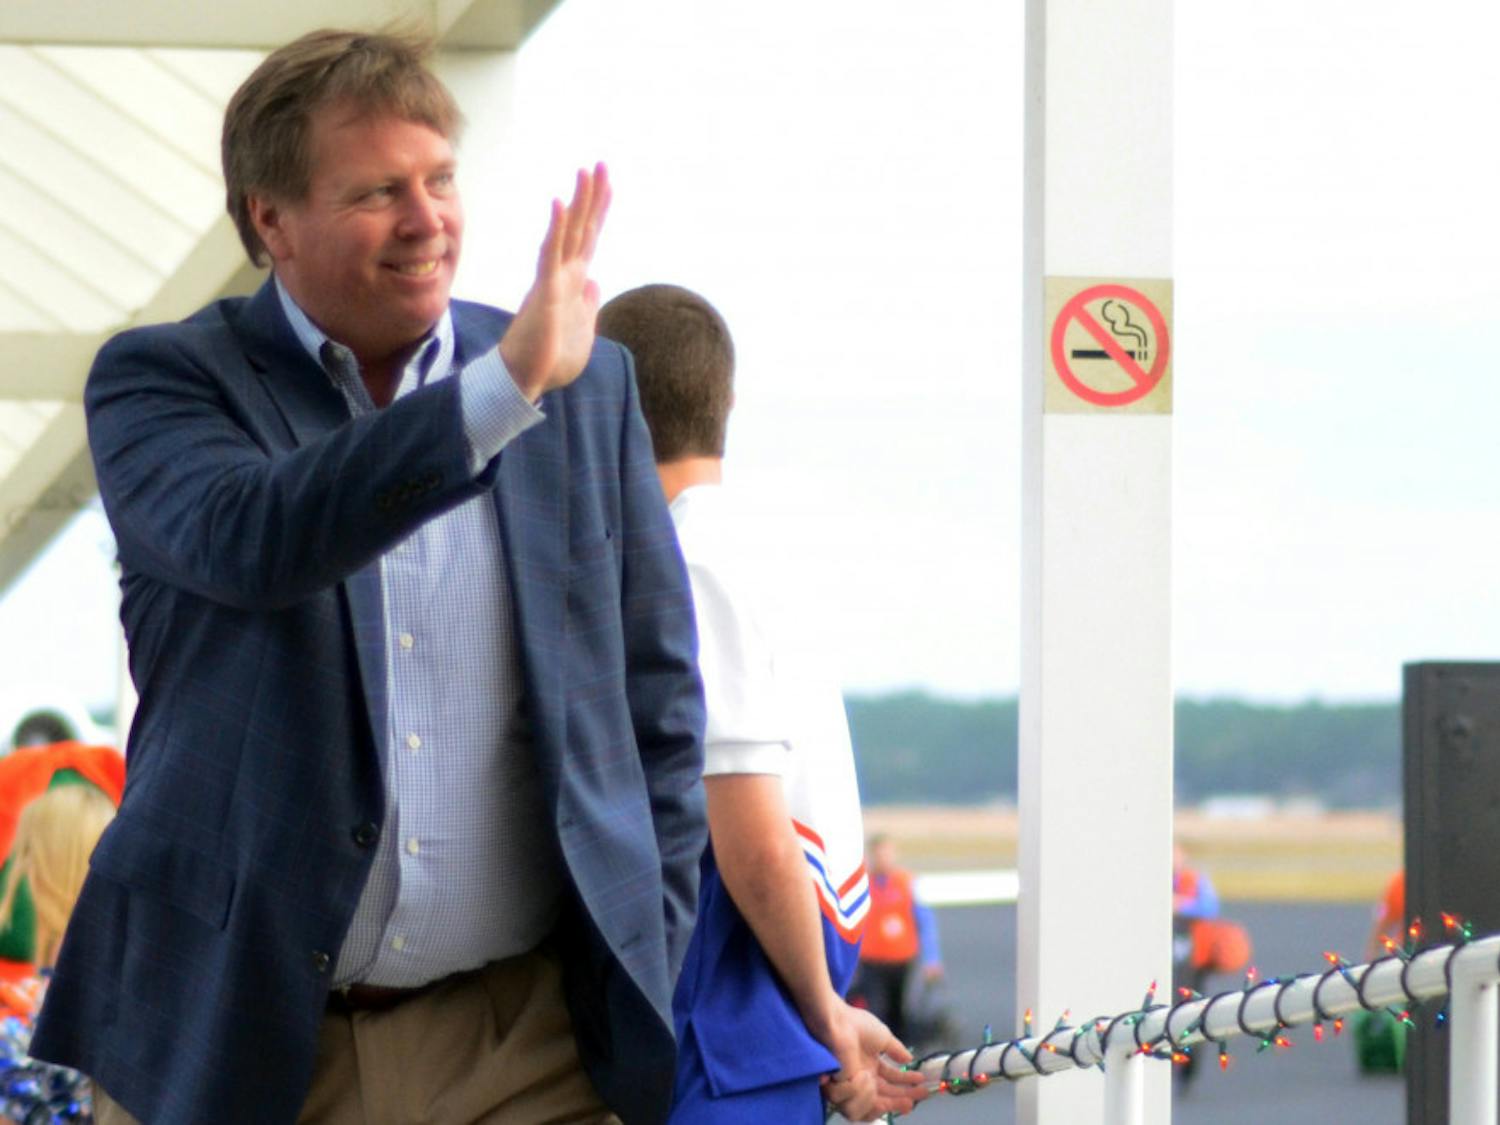 Jim McElwain waves as he walks off the plane after arriving in Gainesville on Dec. 5, 2014.